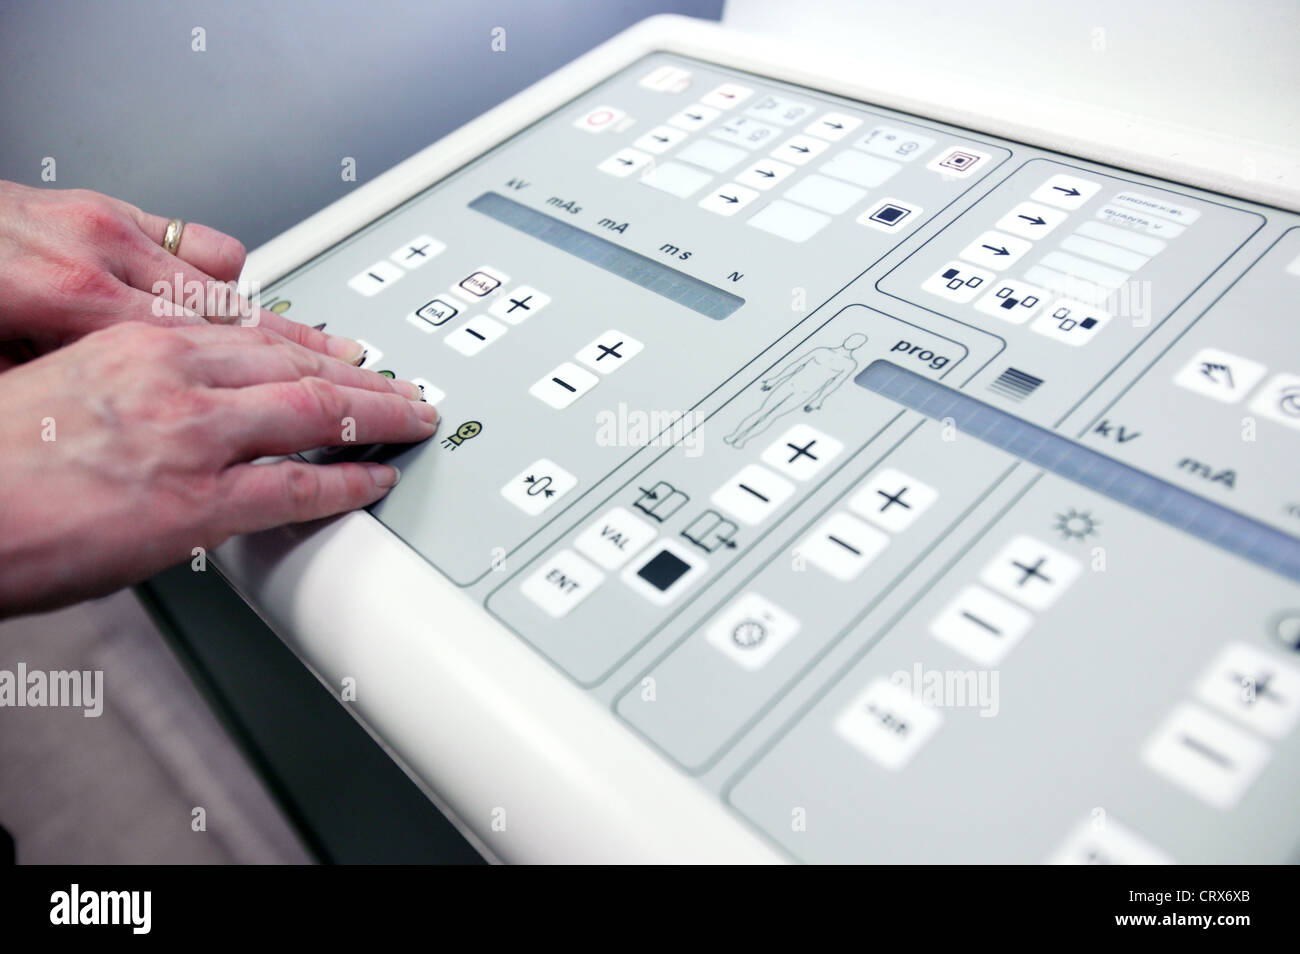 A radiographer's hand preparing to use the x-ray machine control panel. Stock Photo